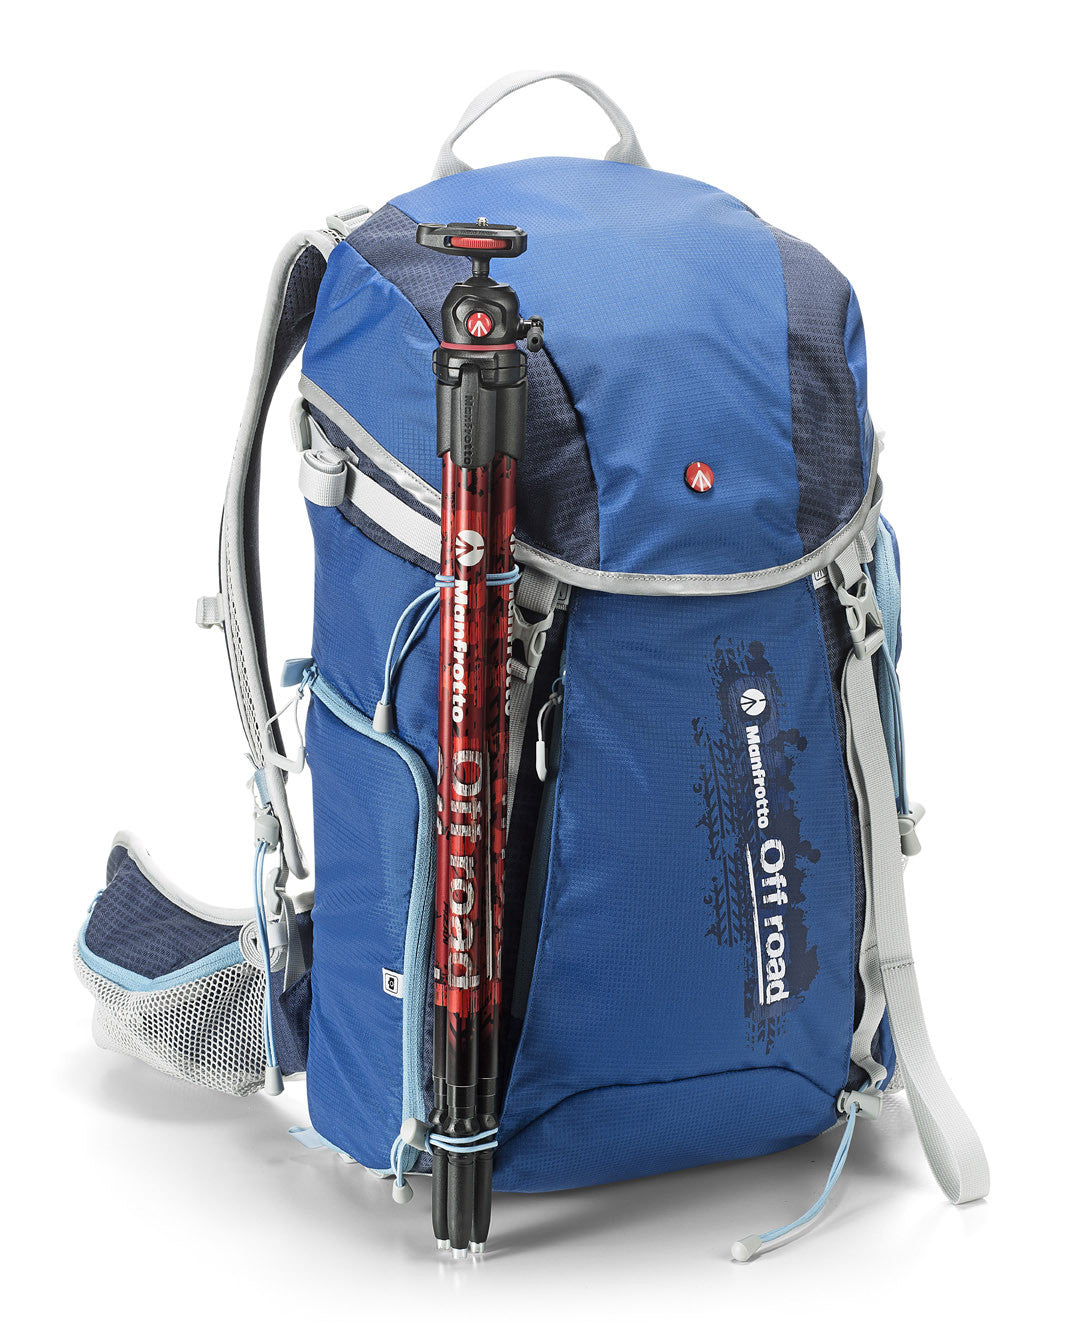 Manfrotto Off Road Hiking Backpack Blue, discontinued, Manfrotto - Pictureline  - 3